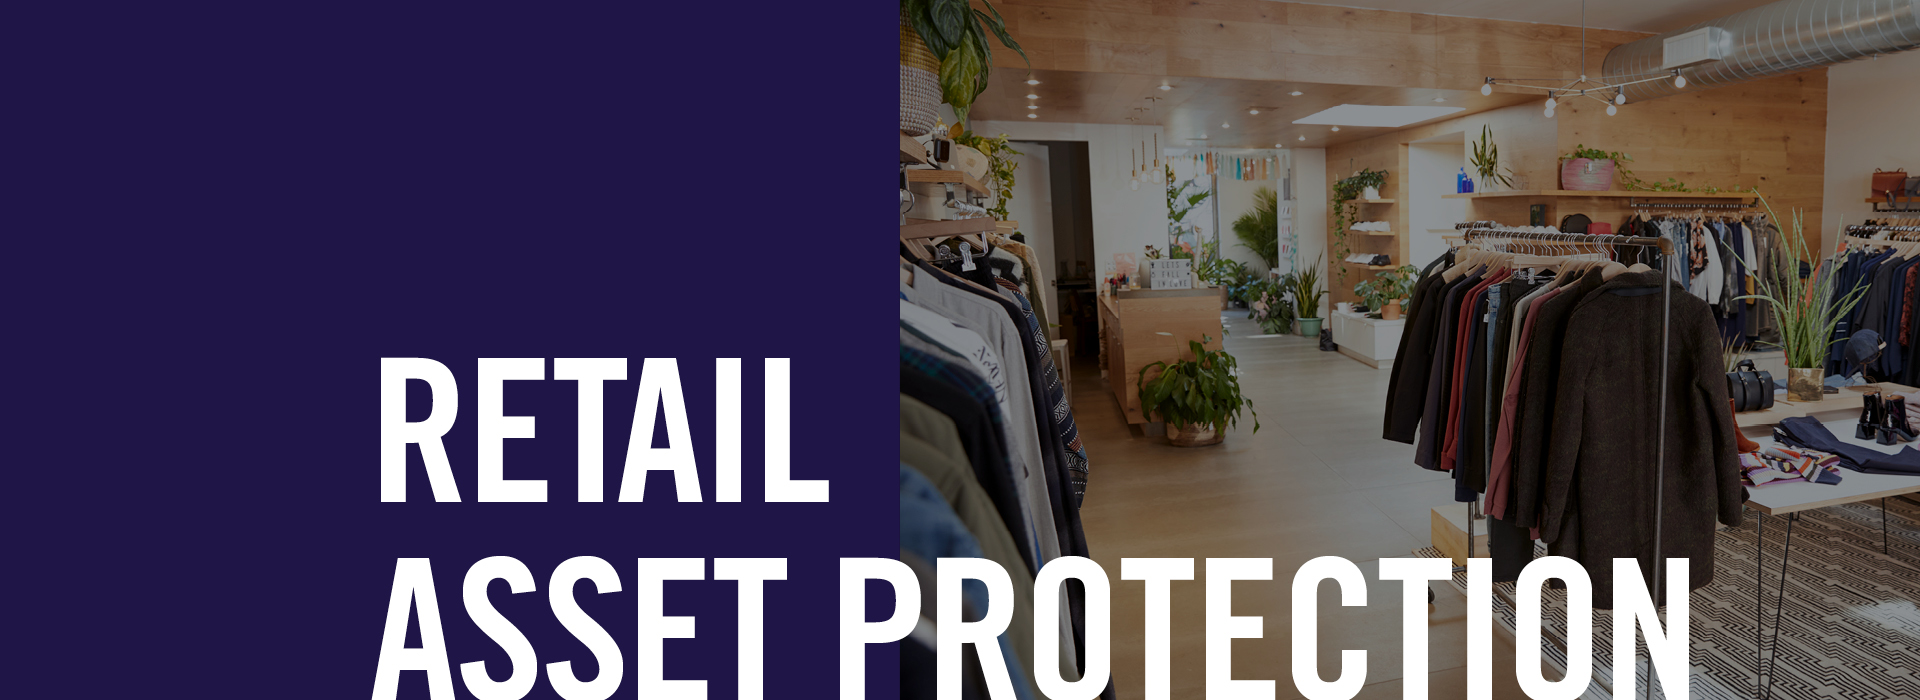 Retail Asset Protection